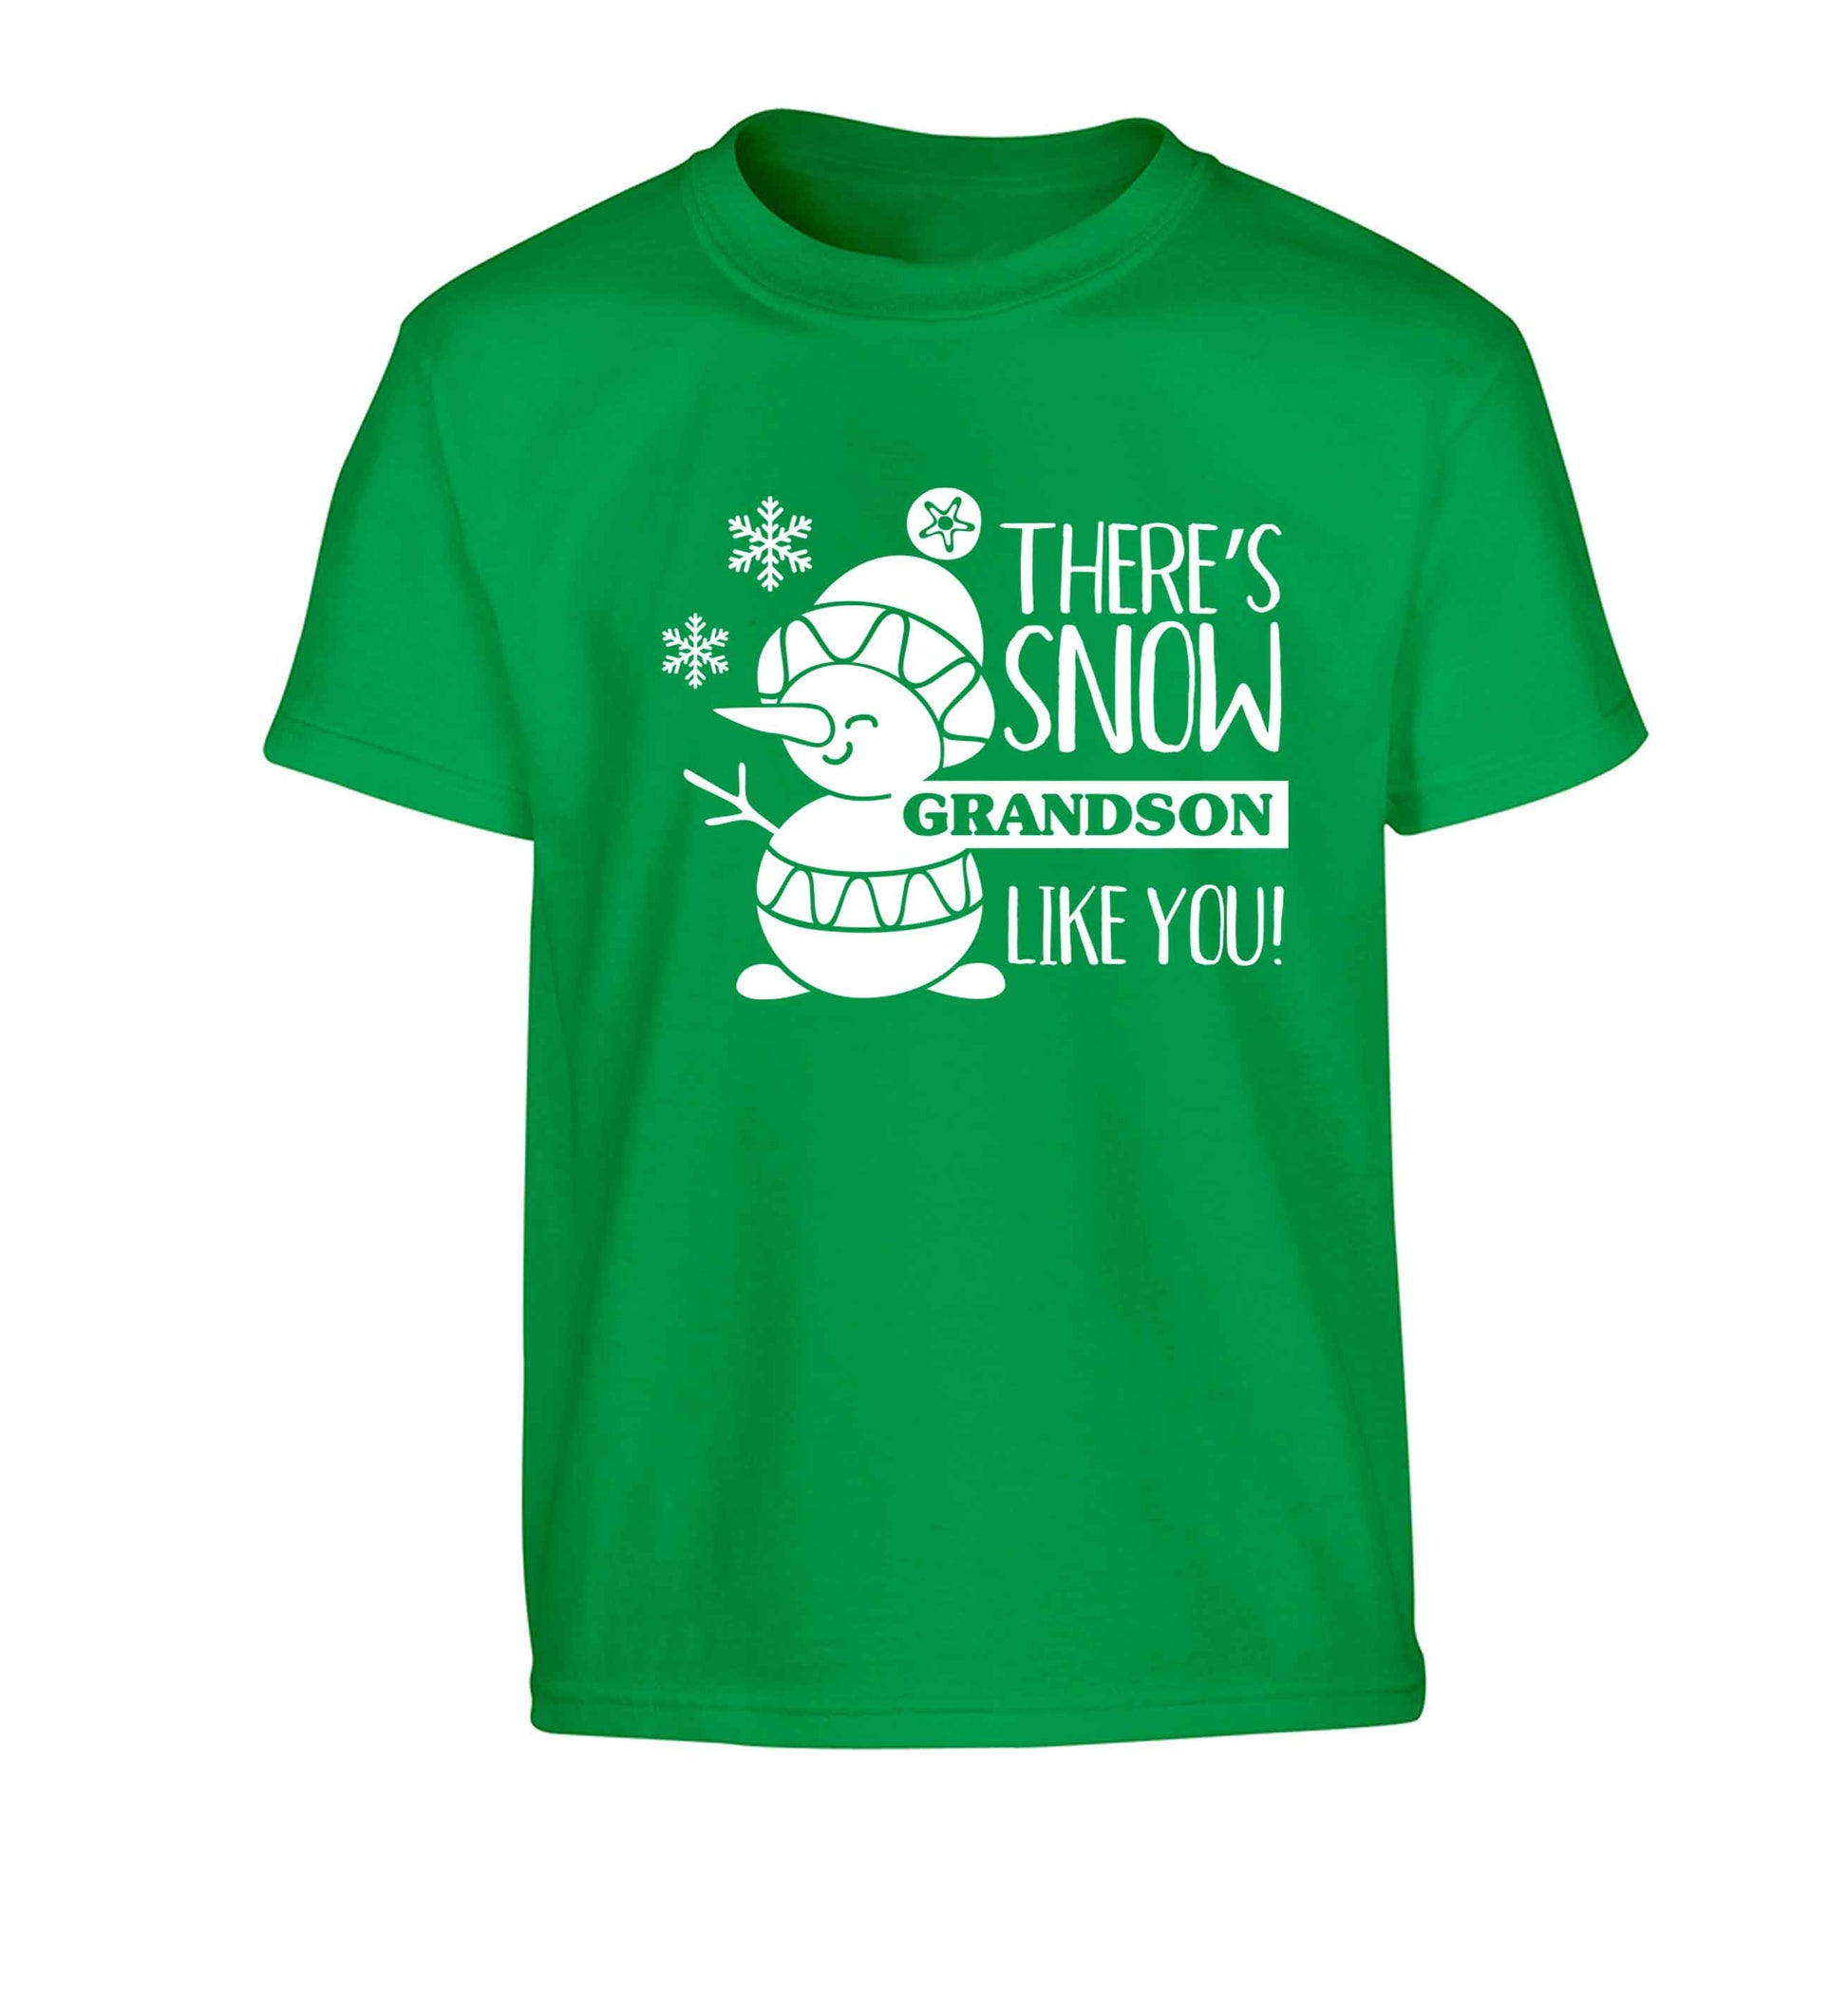 There's snow grandson like you Children's green Tshirt 12-13 Years